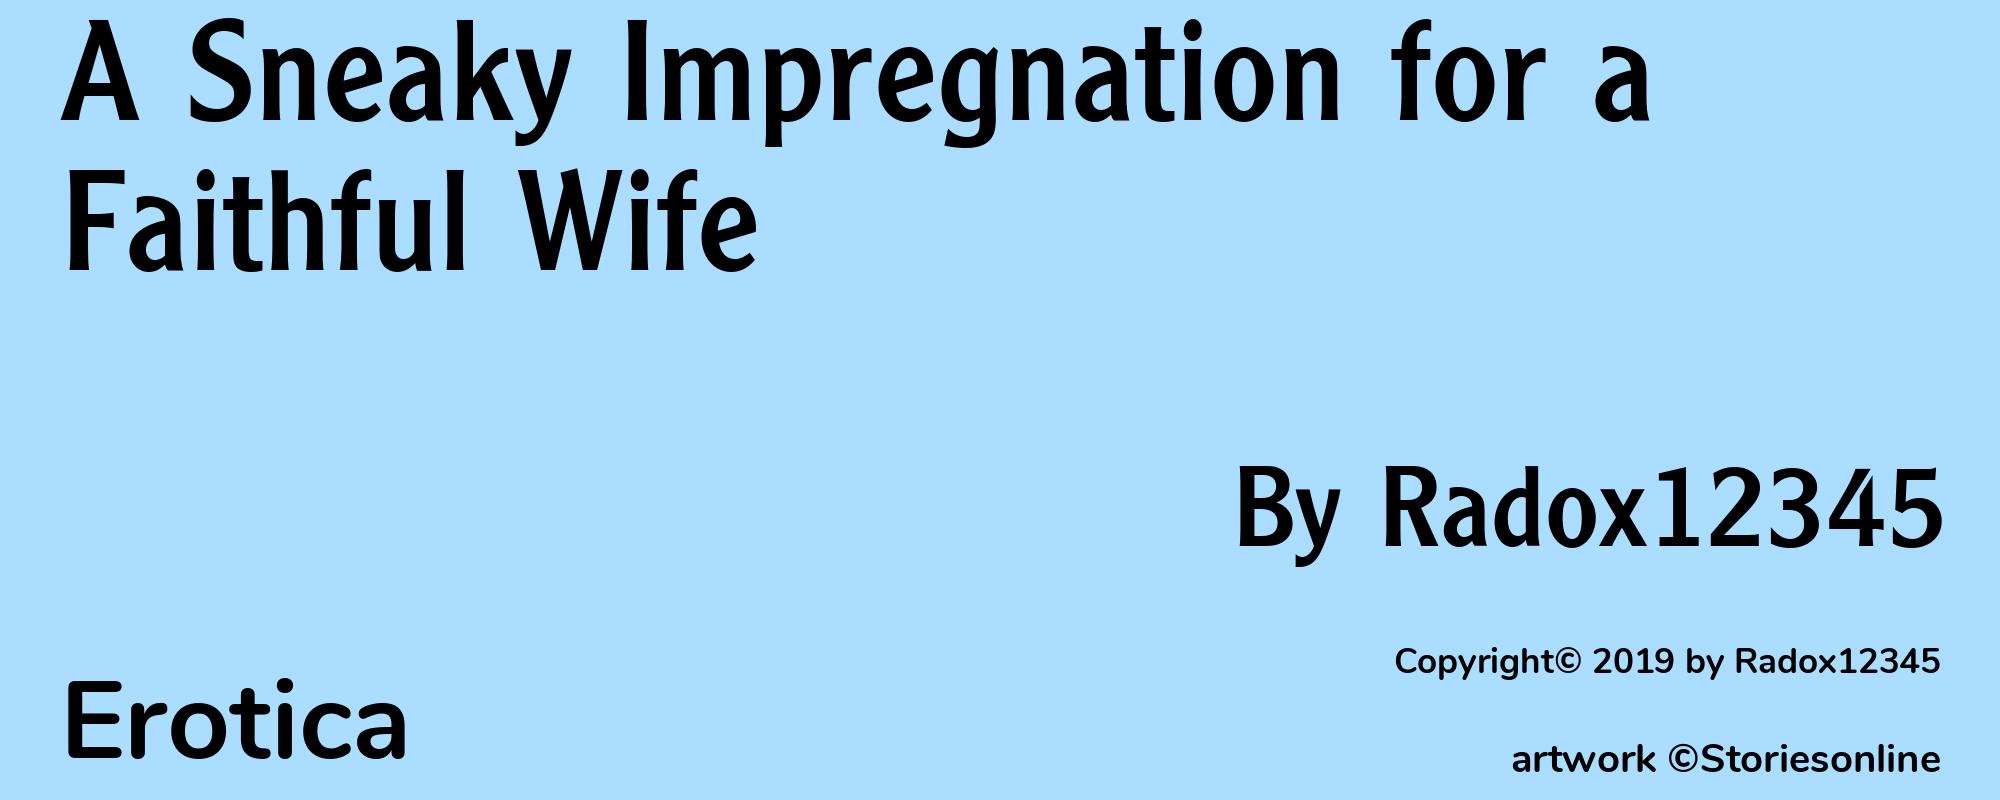 A Sneaky Impregnation for a Faithful Wife - Cover